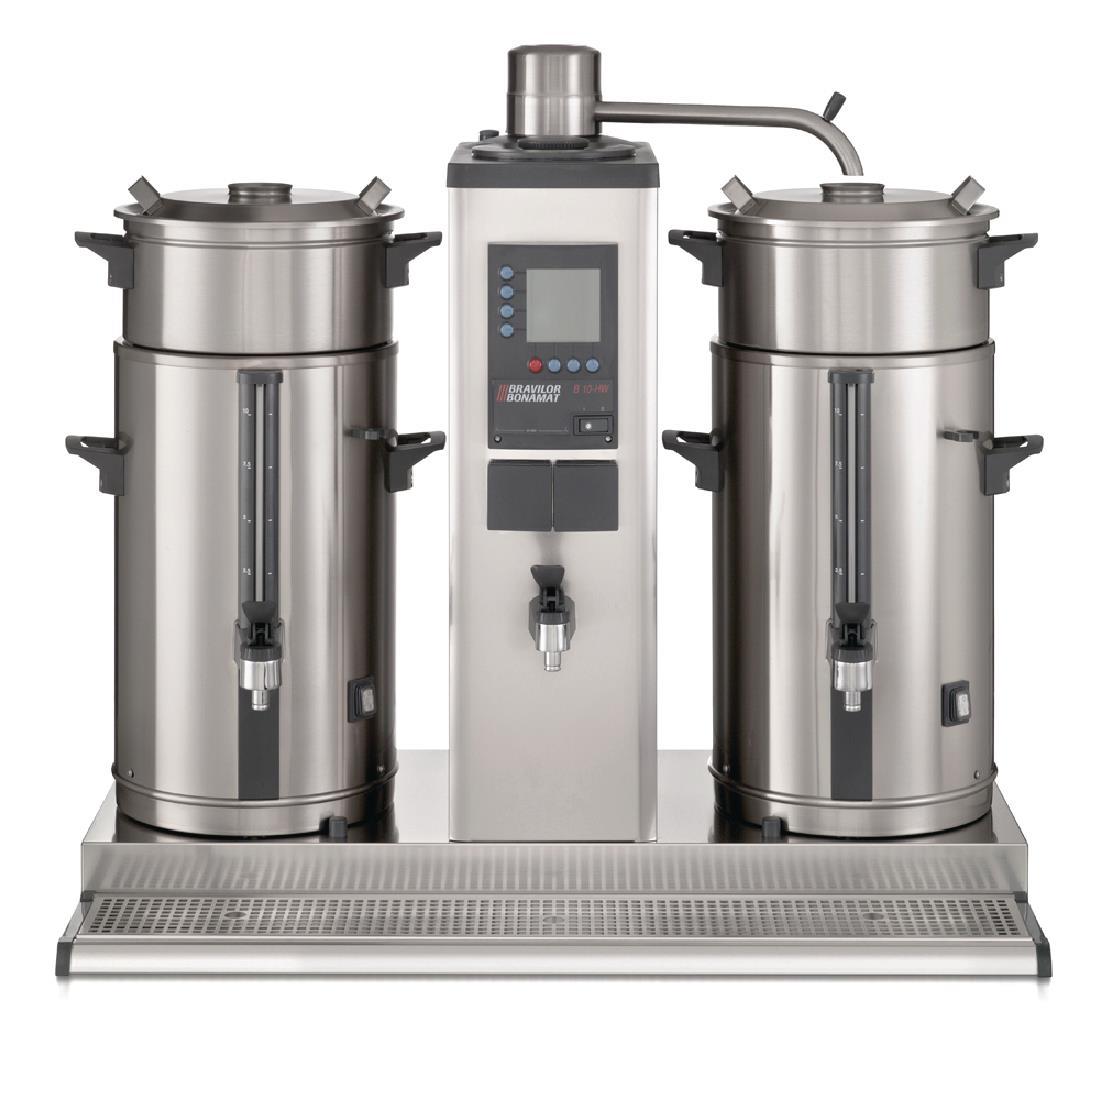 Bravilor B10 HW Bulk Coffee Brewer with 2x10Ltr Coffee Urns and Hot Water Tap - DC690-1P  - 2